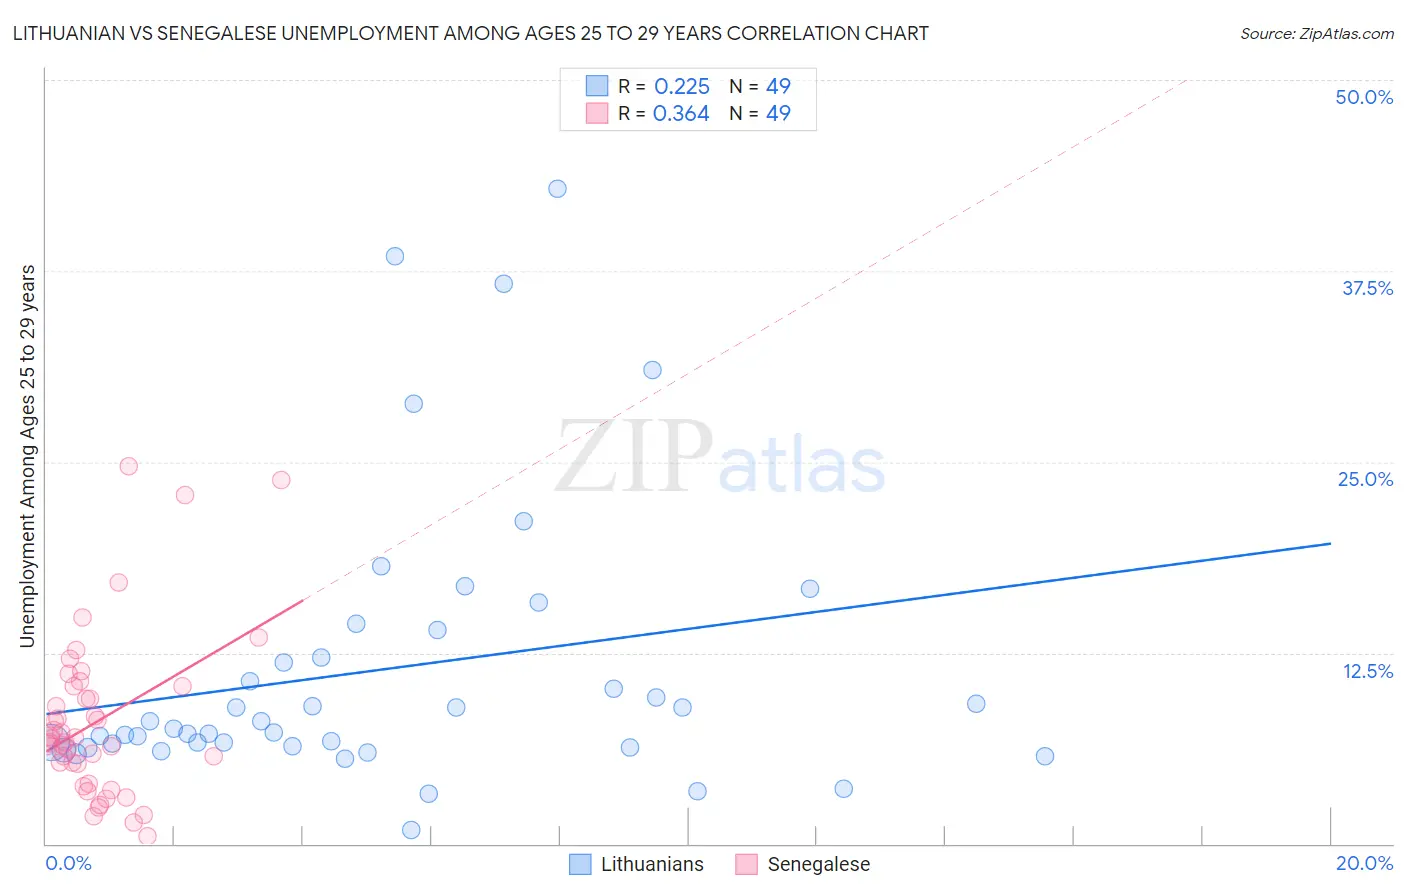 Lithuanian vs Senegalese Unemployment Among Ages 25 to 29 years